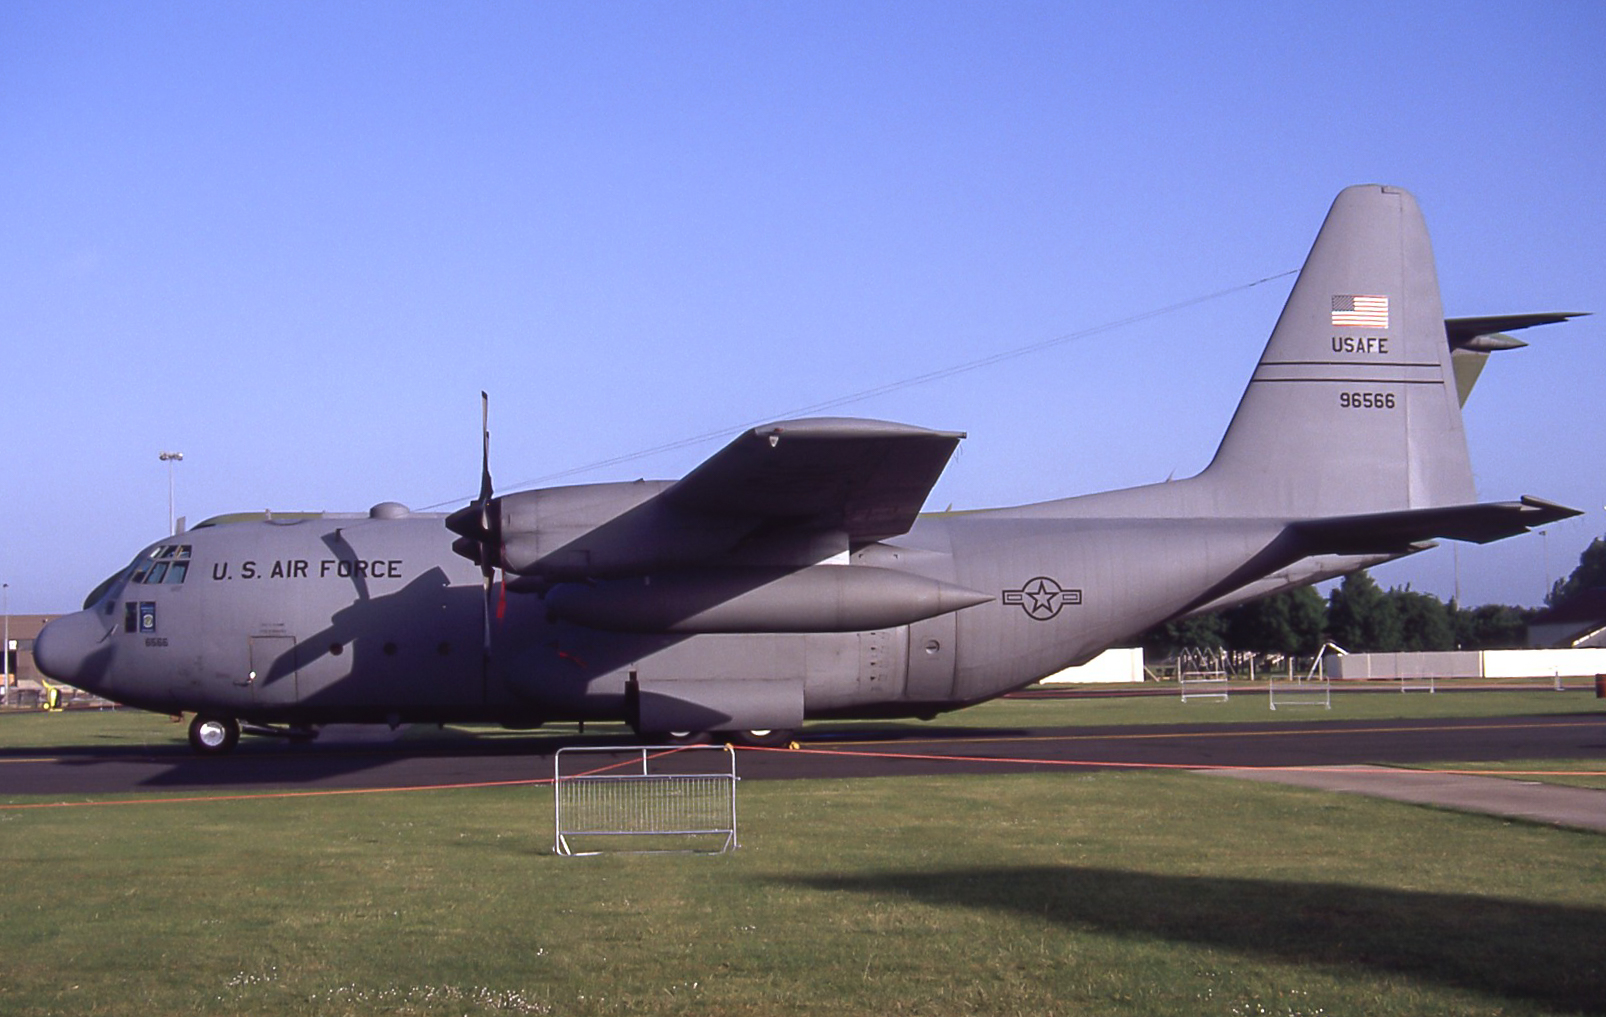 69-6566/696566 Withdrawn from use Lockheed C-130 Hercules Airframe Information - AVSpotters.com